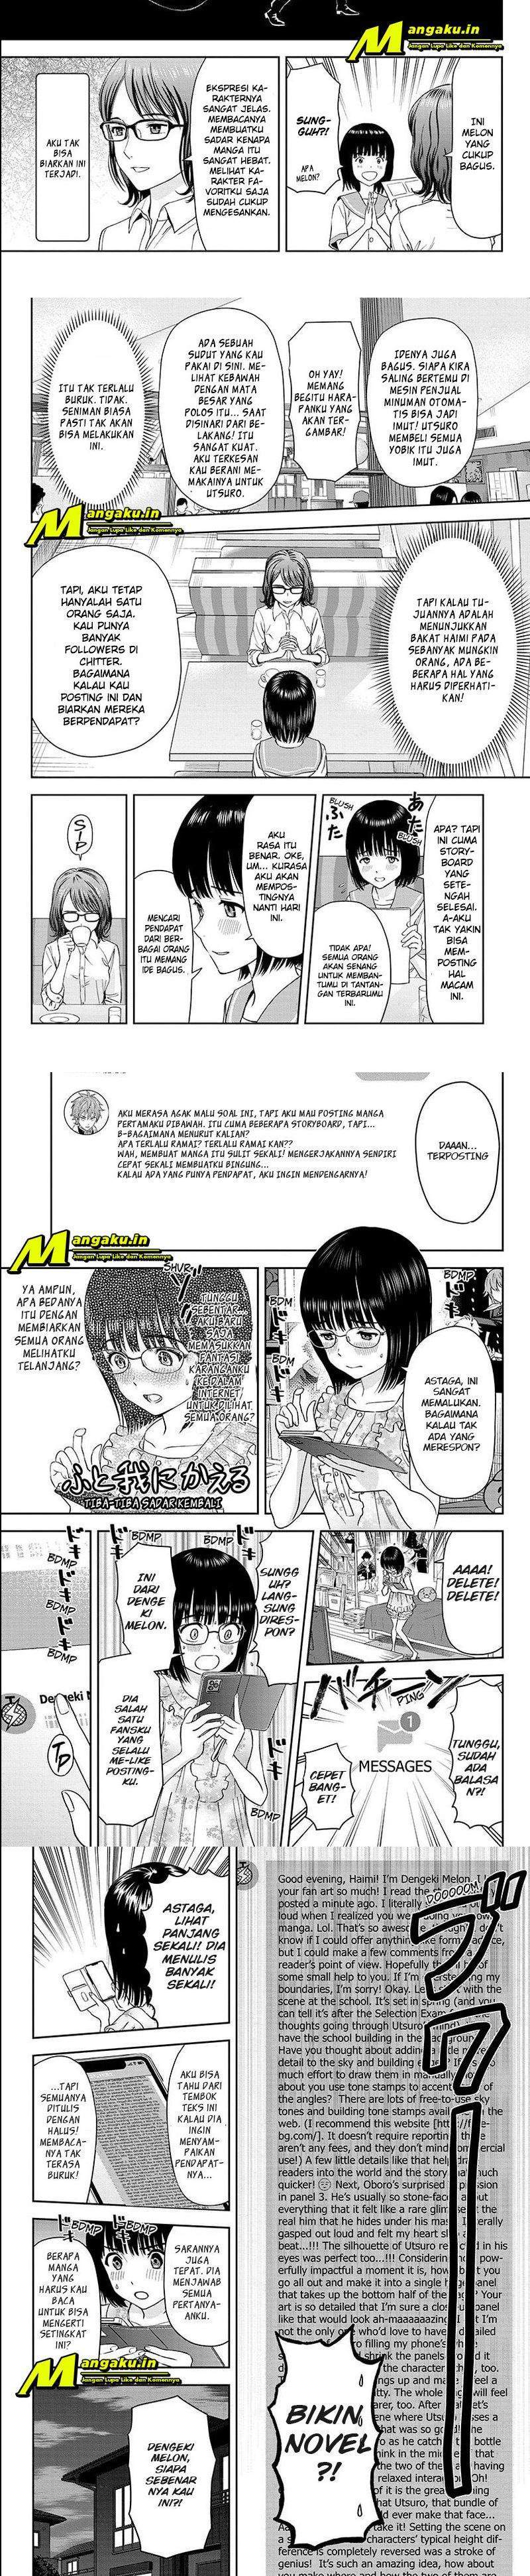 Witch Watch Chapter 34 5